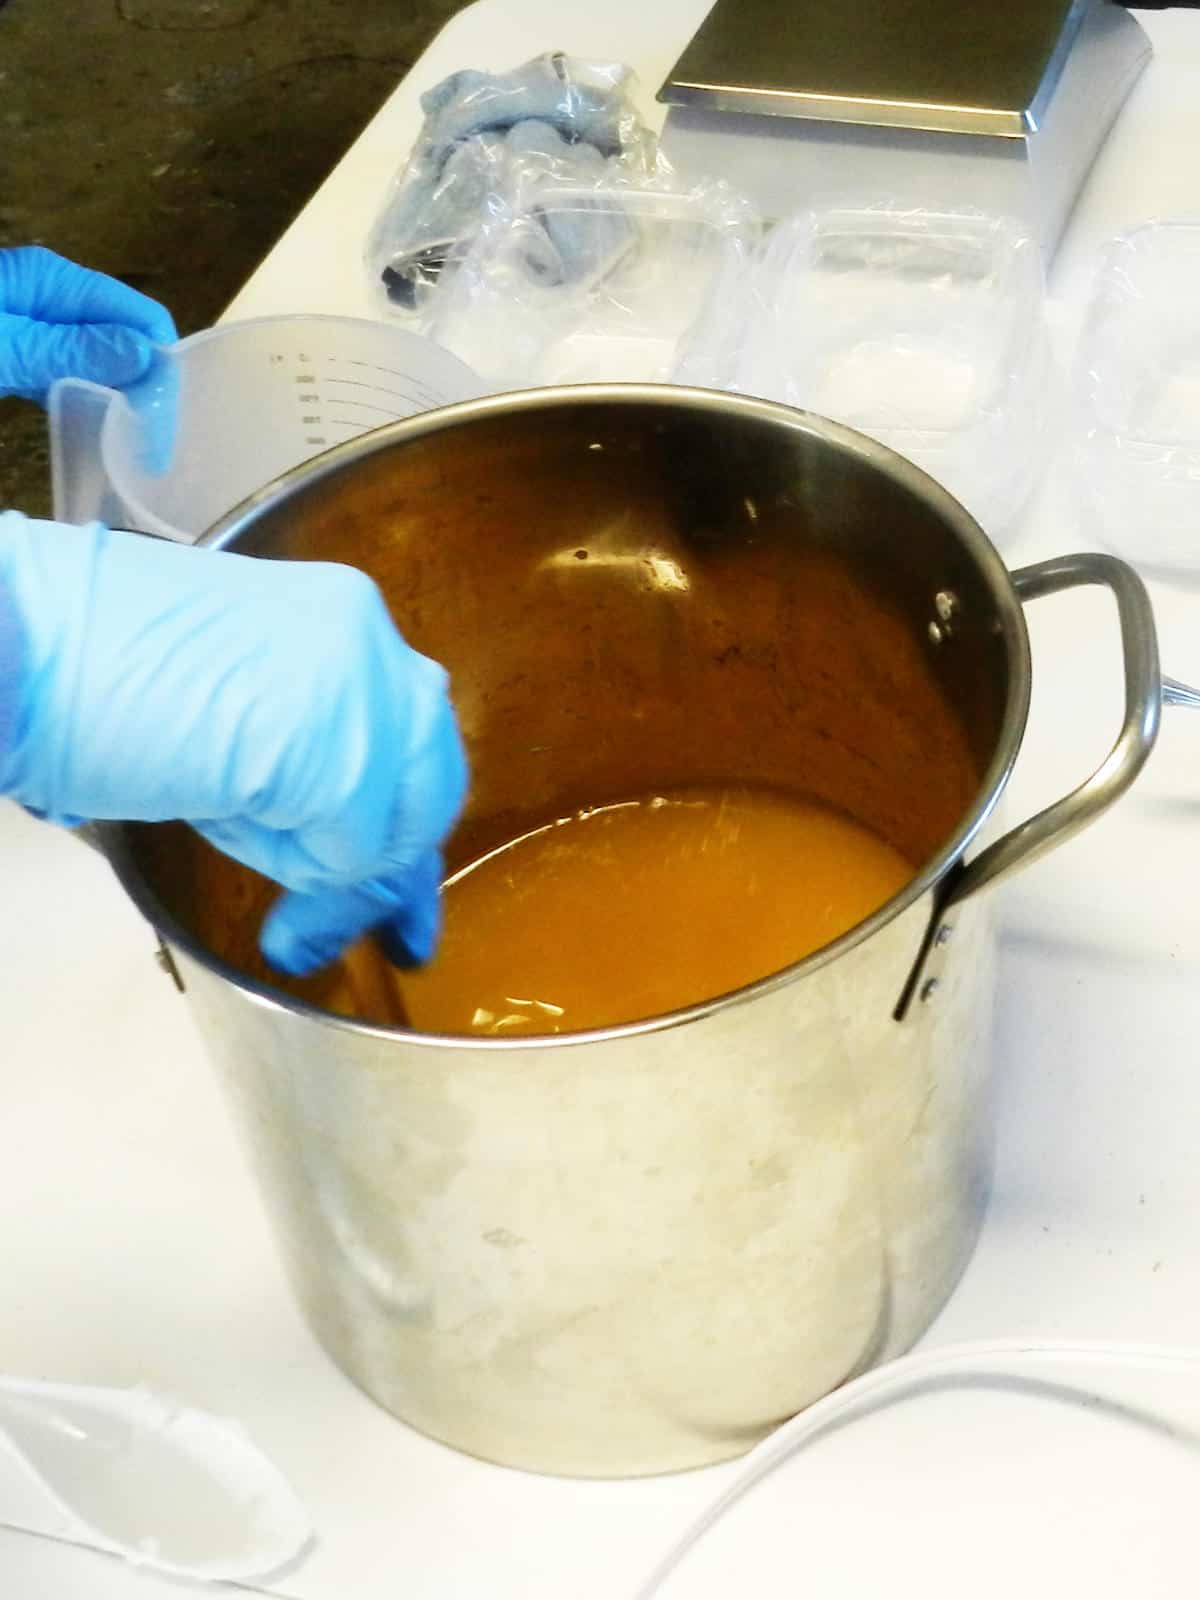 stirring in sodium hydroxide into a kettle of soap making oils.